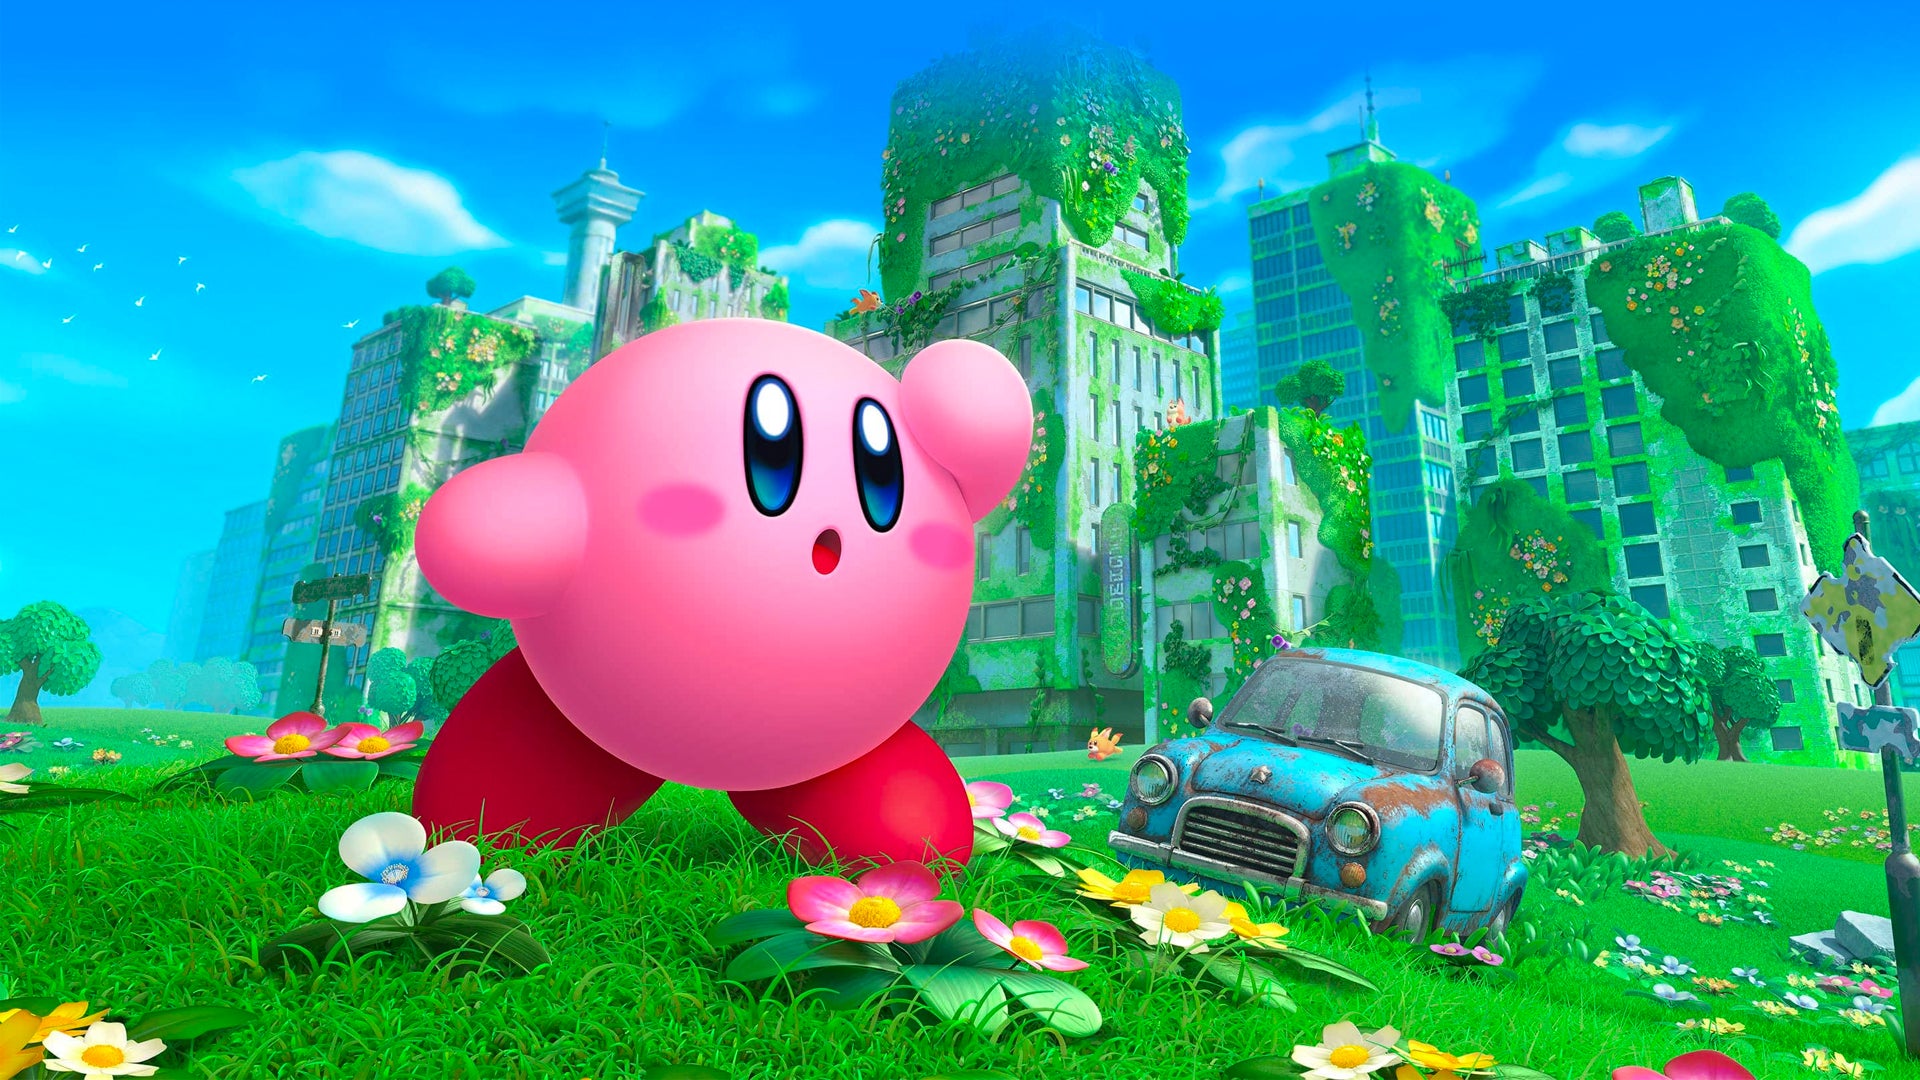 Kirby wallpaper - Game wallpapers - #23683